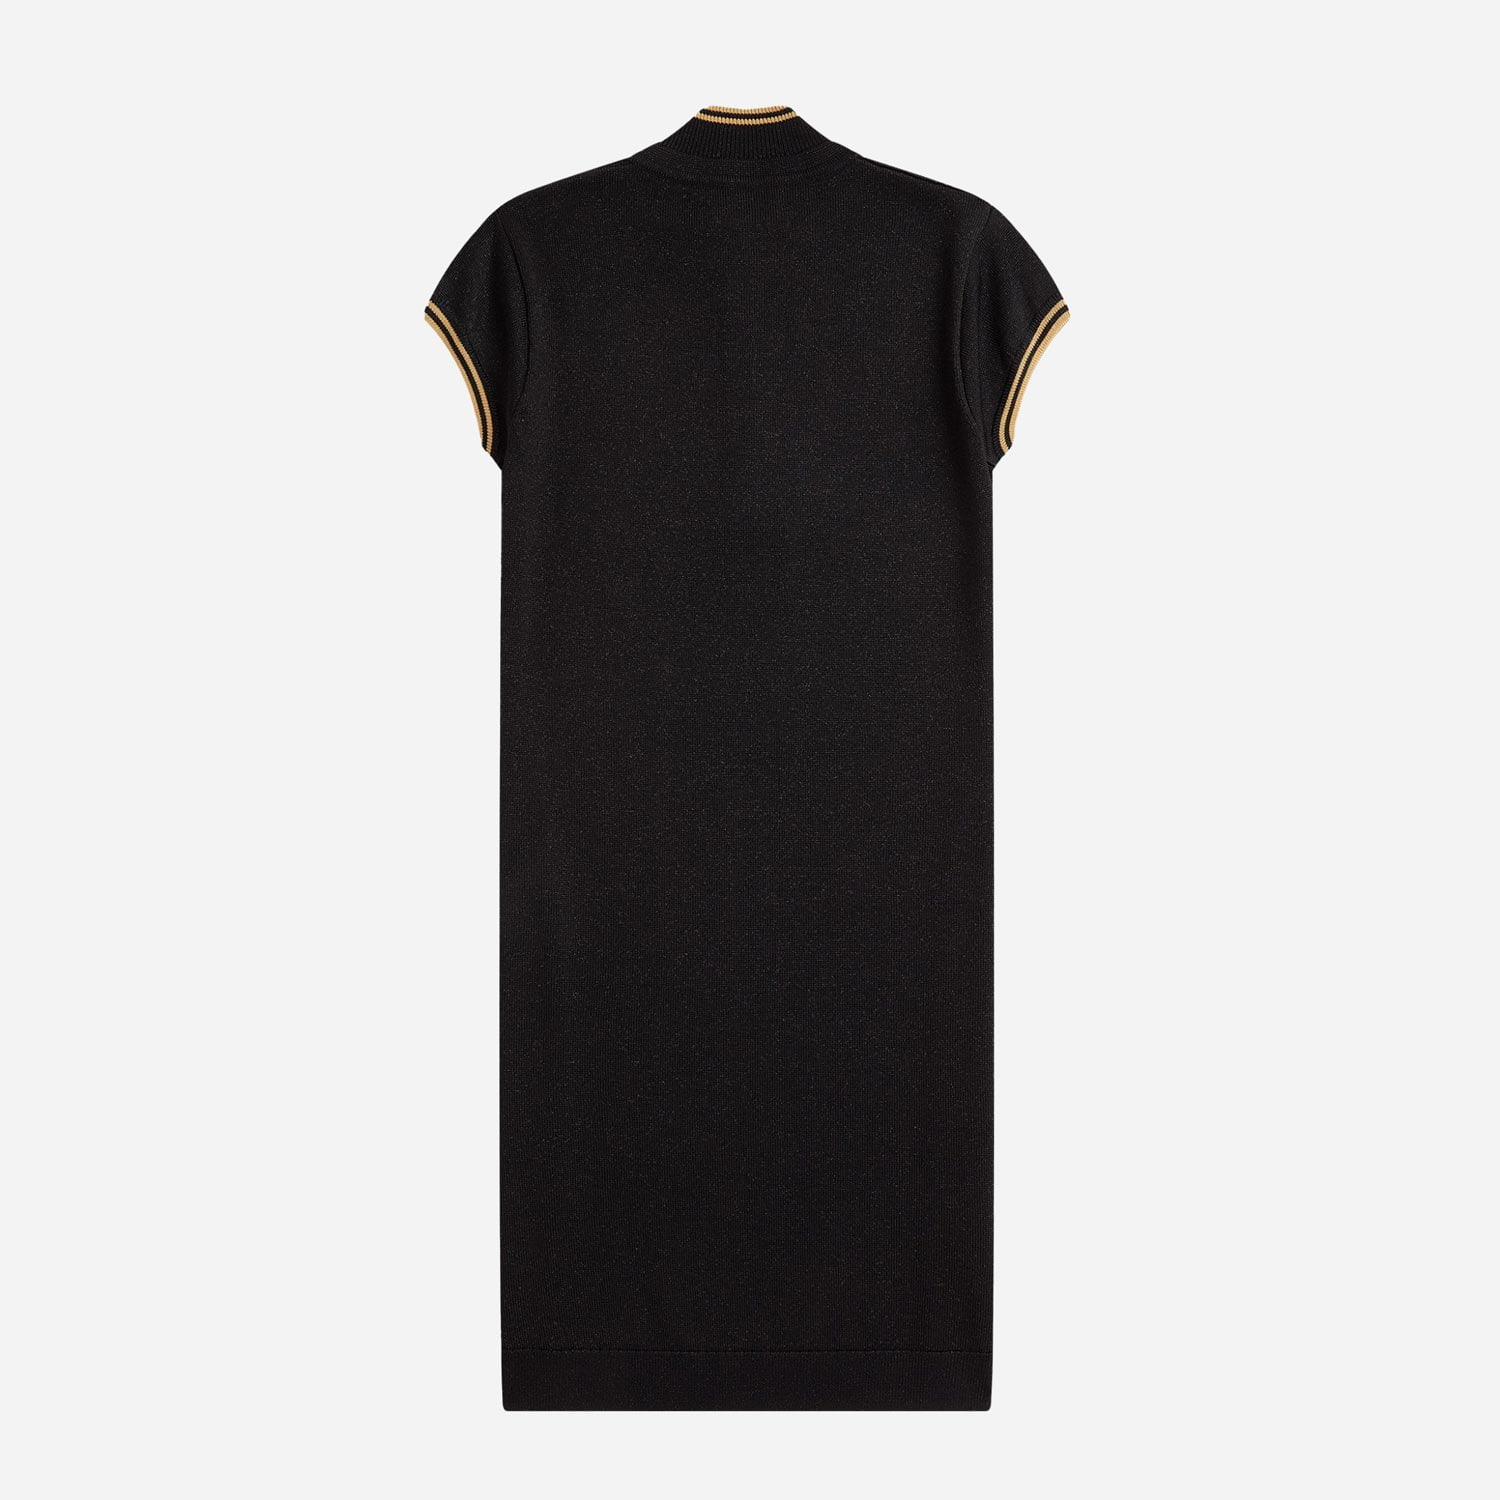 Fred Perry Women's Metallic Knitted Dress - Black